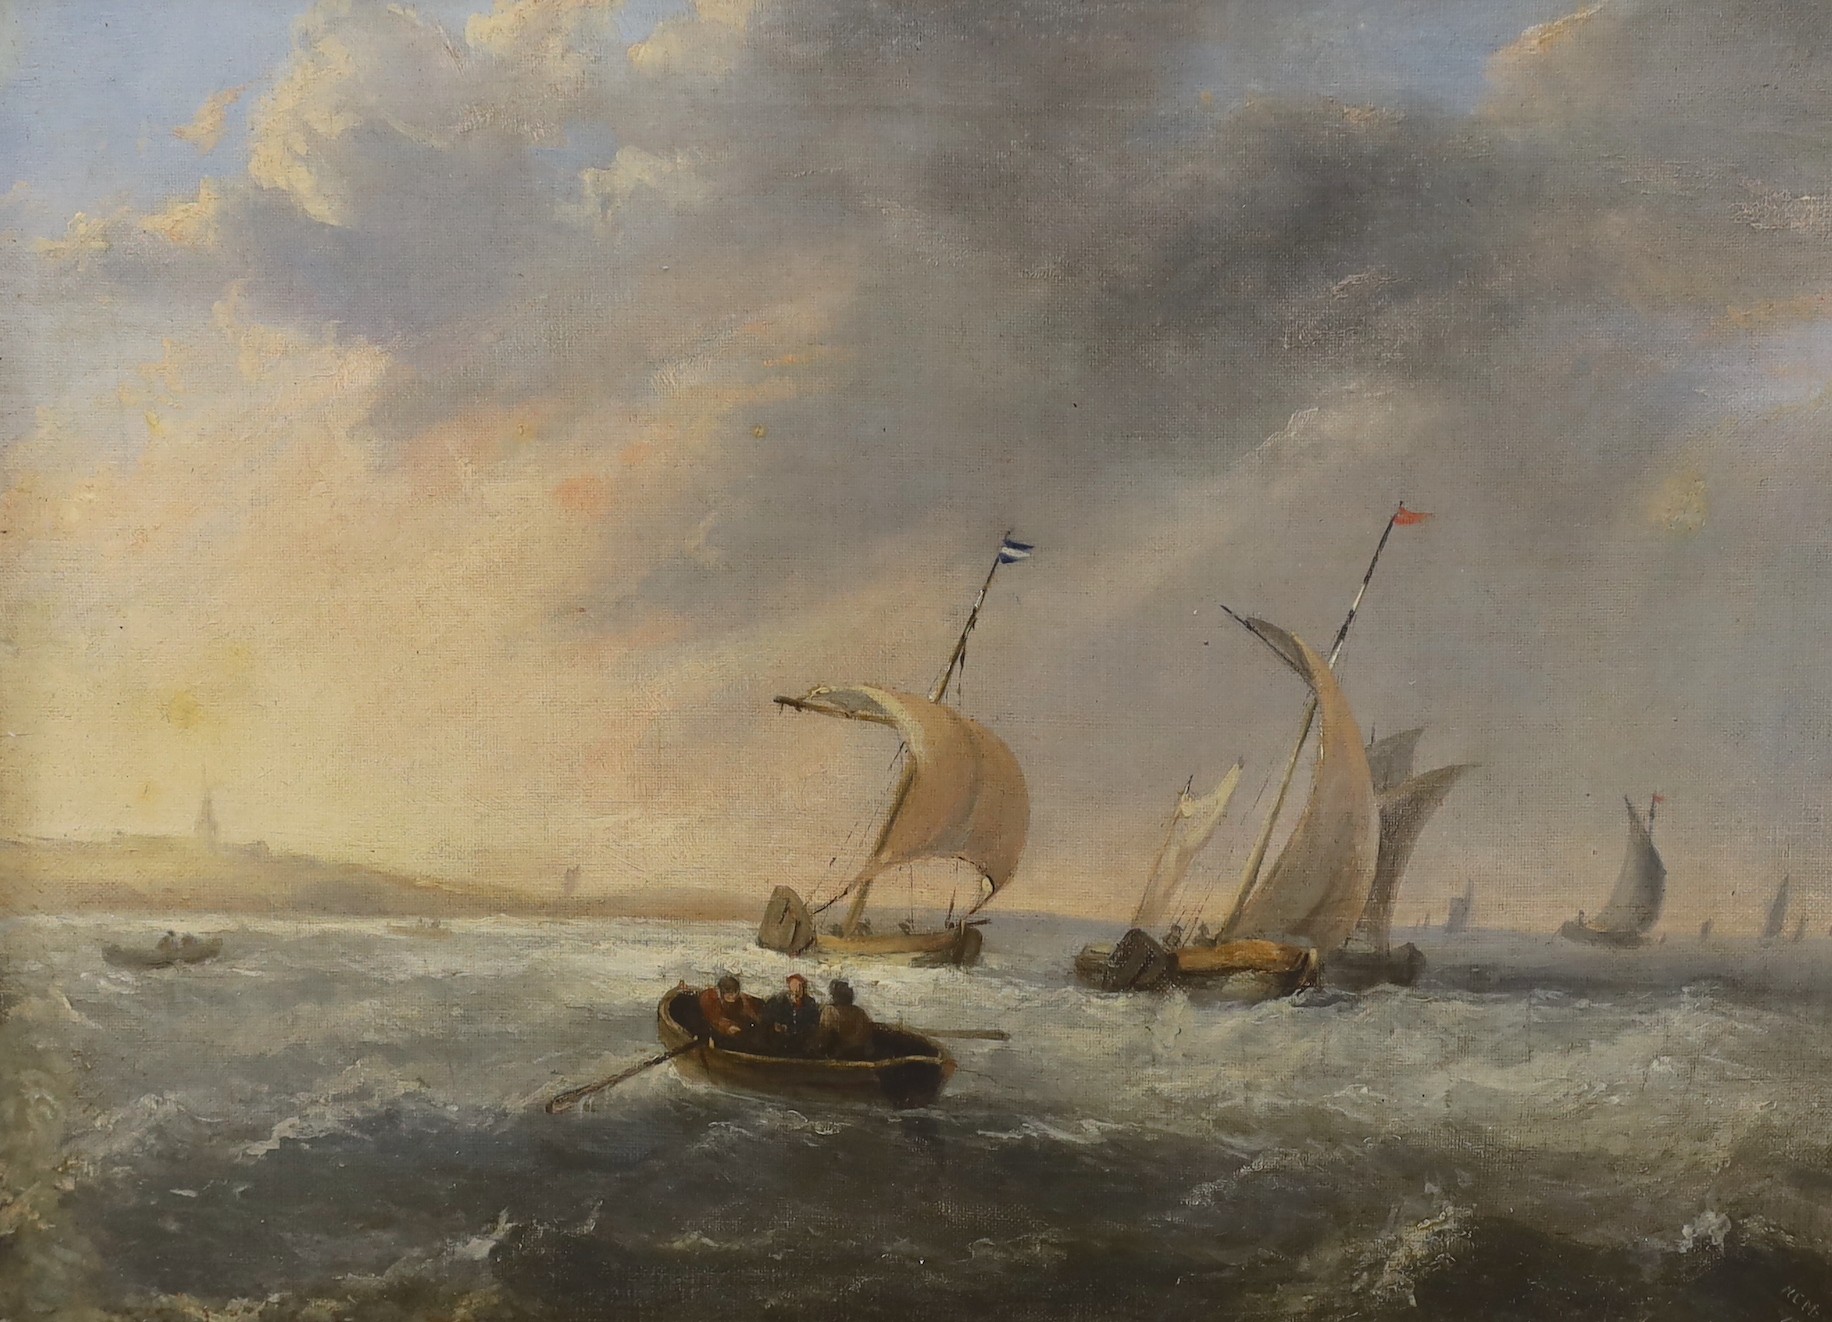 H.C. Maxwell (19th C.), oil on canvas, Sail barges along the coast, signed and dated 1839, 30 x 40cm